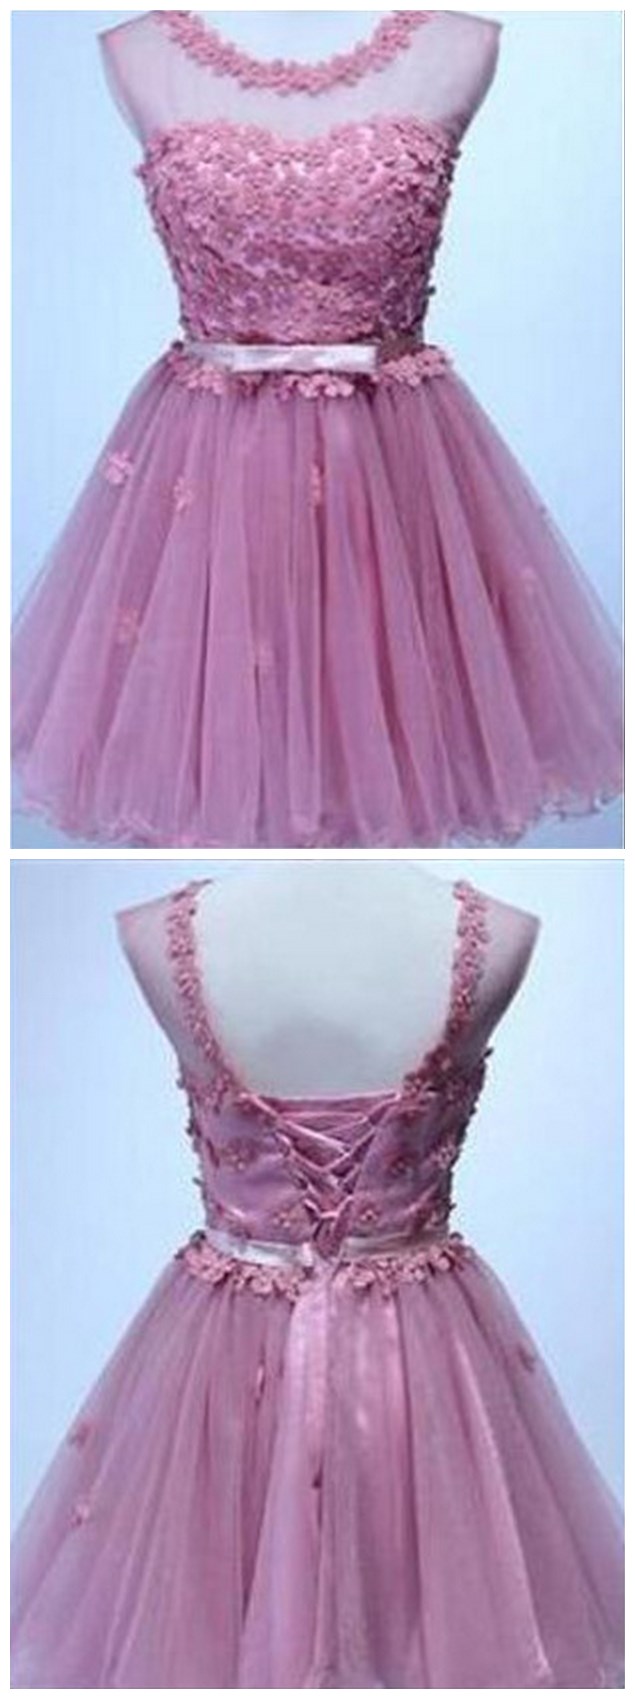 Homecoming Dresses, Appliques Homecoming Dresses, Organza Homecoming Dresses, Homecoming Dresses, Juniors Homecoming Dresses